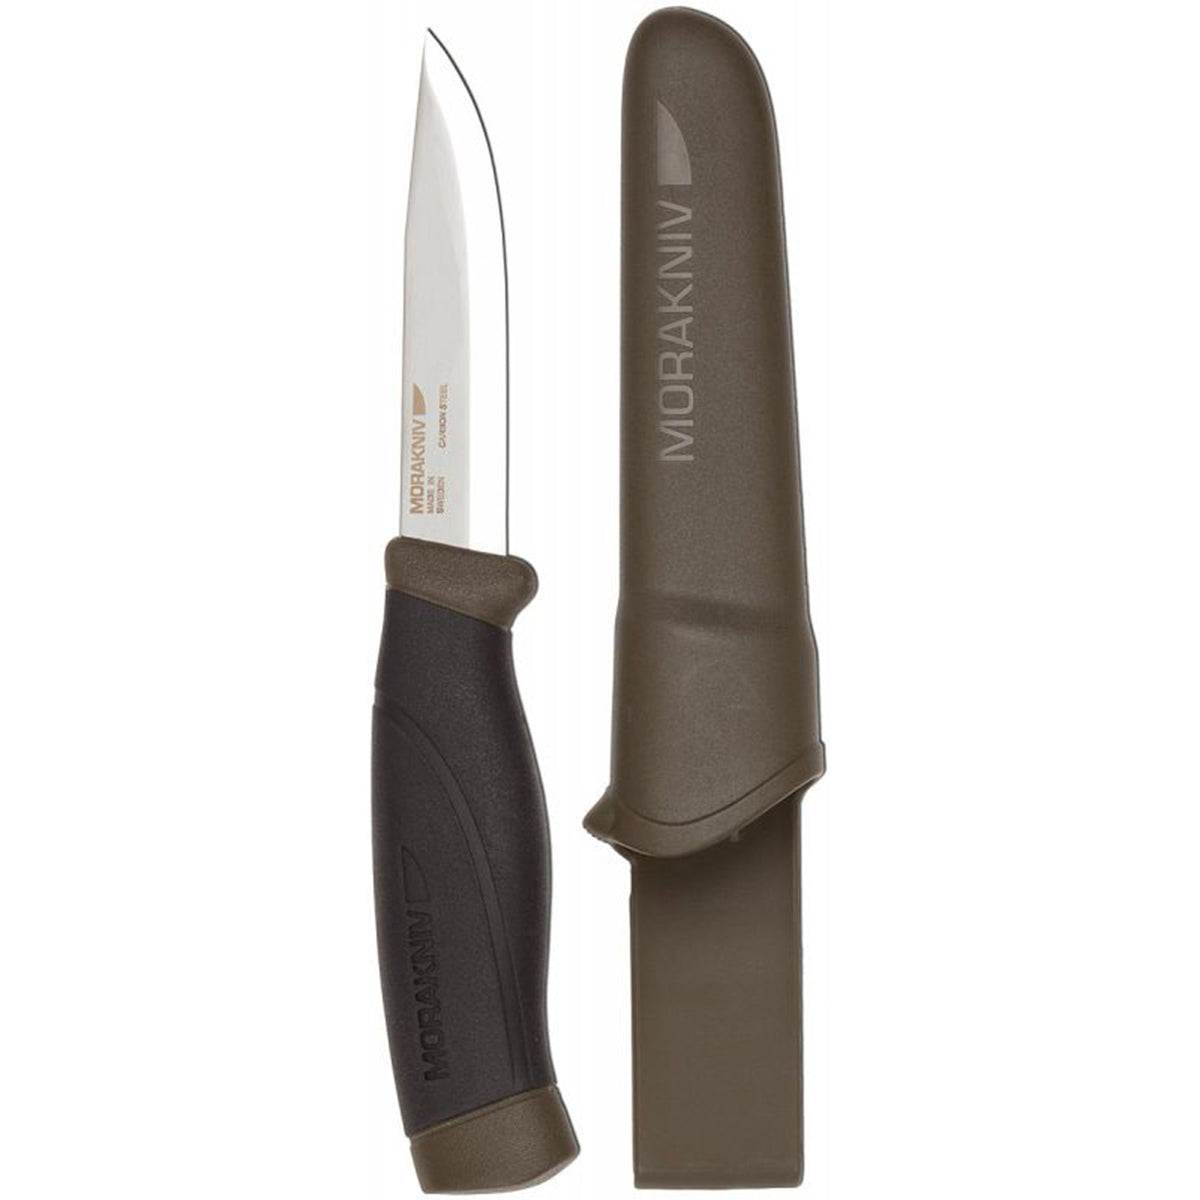 the companion knife is shown next to it&#39;s protective sheath